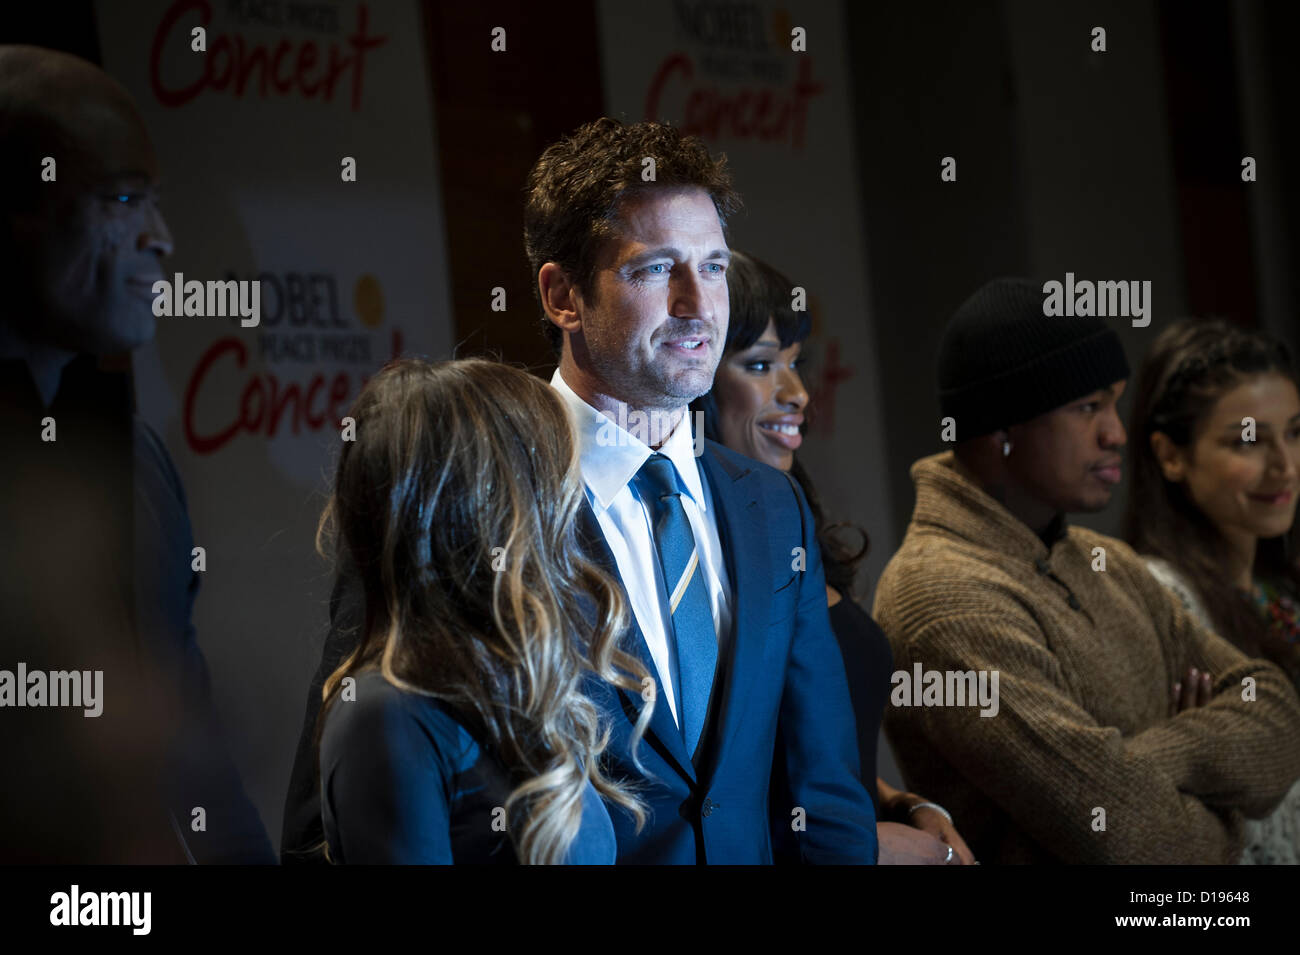 Oslo, Norway. 11/12/2012. From left, Seal, Sarah Jessica Parker, Gerard Butler, Jennifer Hudson, Ne-Yo and Laleh during a press conference for the Nobel Peace Prize concert in Oslo. Credit:  Alexander Widding / Alamy Live News Stock Photo